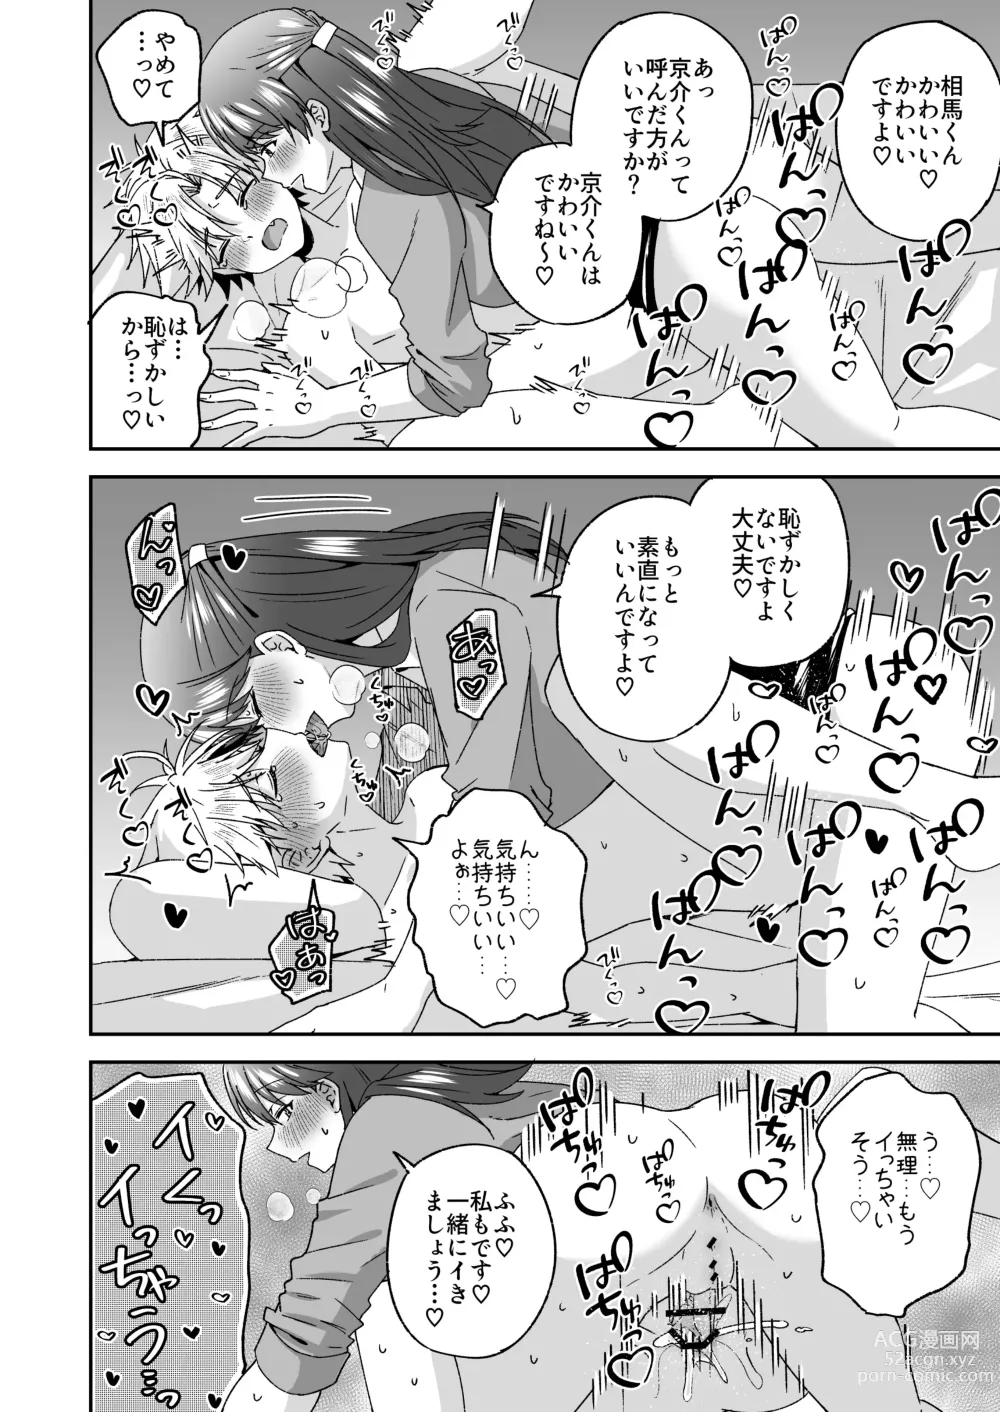 Page 37 of doujinshi A story about a delinquent boy who gets chastity belt ejaculation control reverse anal sex by a female teacher who is a nymphomaniac